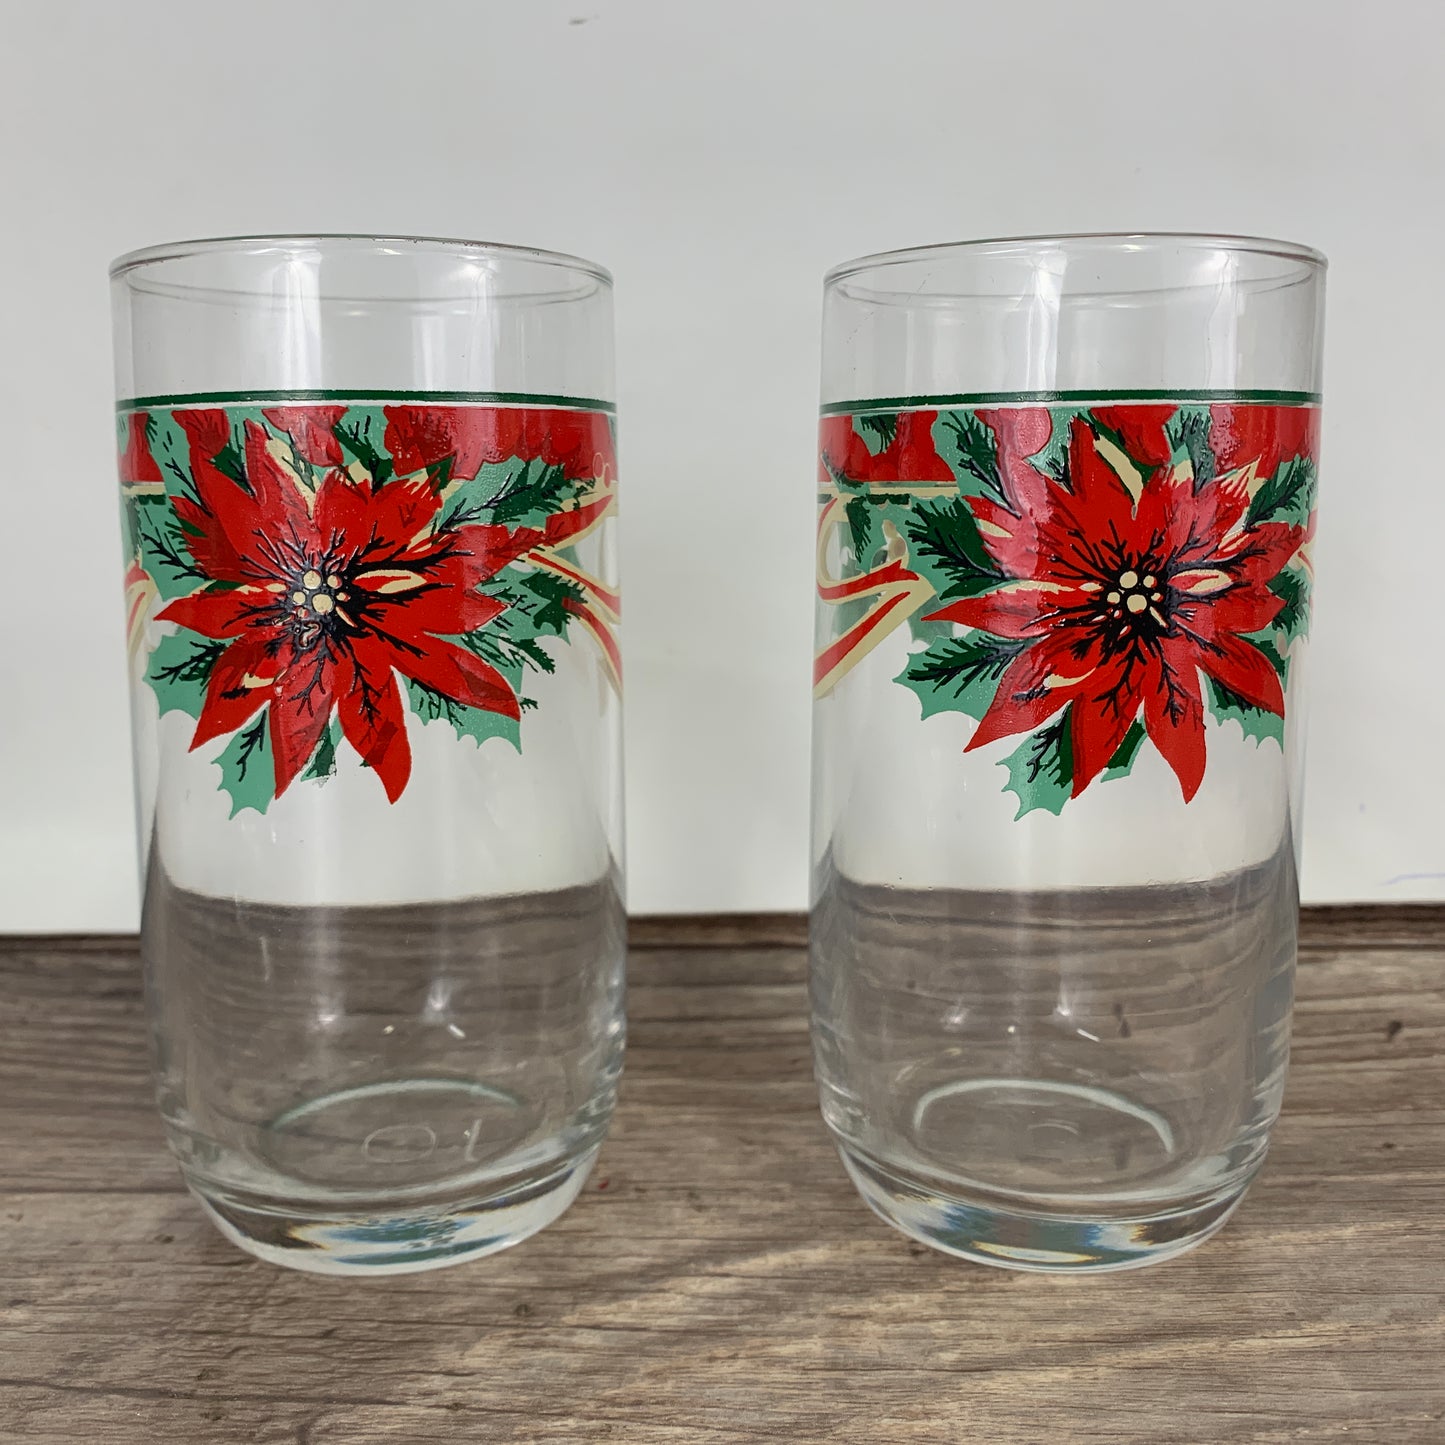 Set of 4 Christmas Tall Drinking Glasses